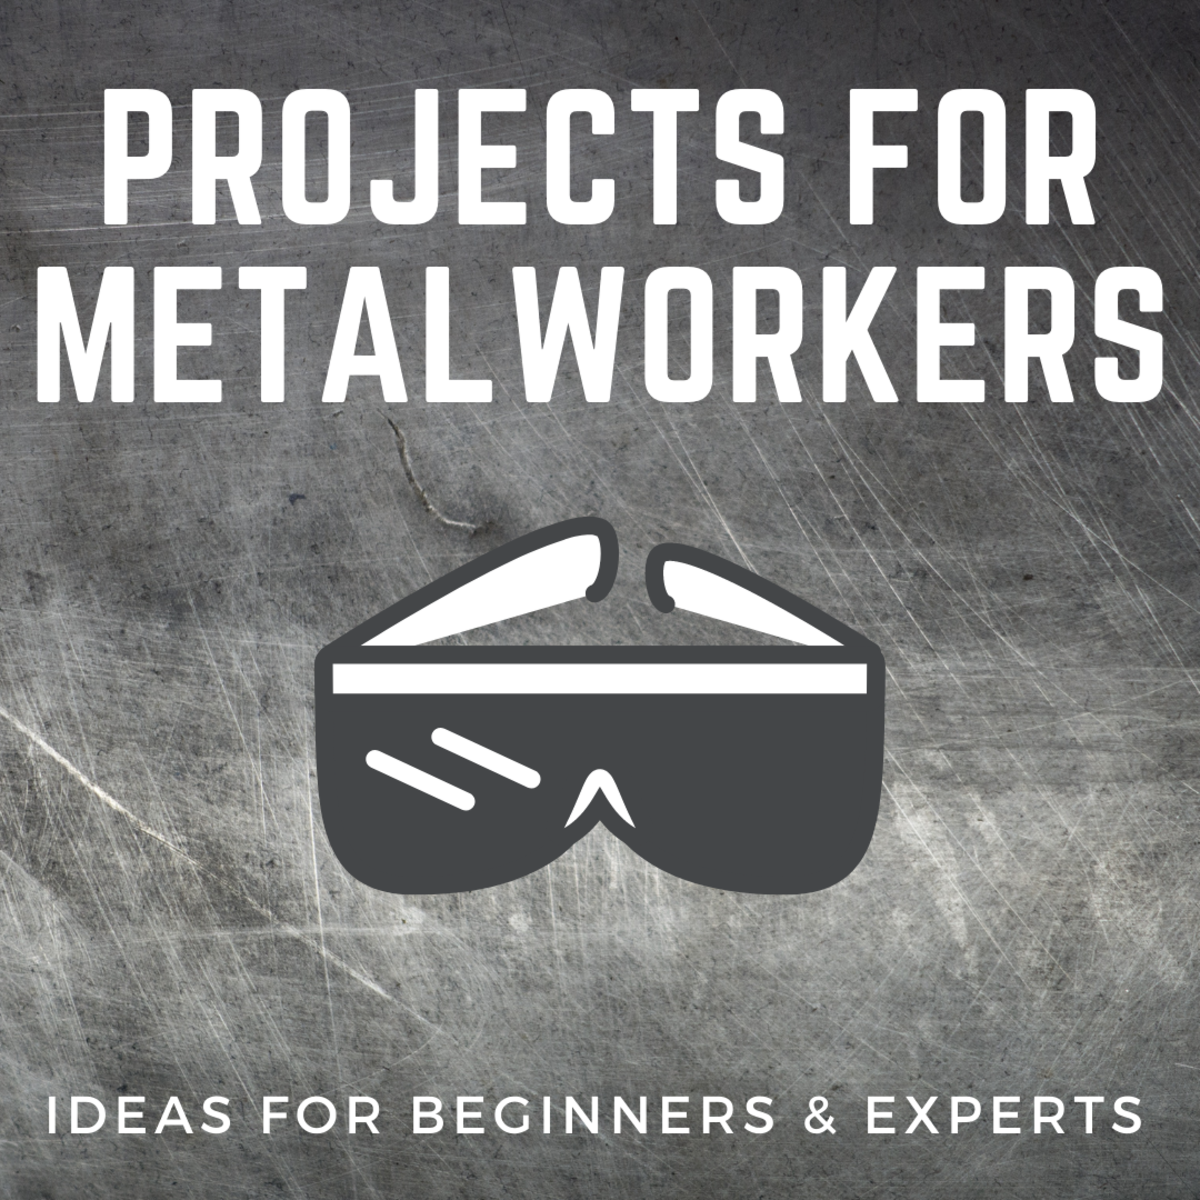 28 Metalworking Projects and Ideas!